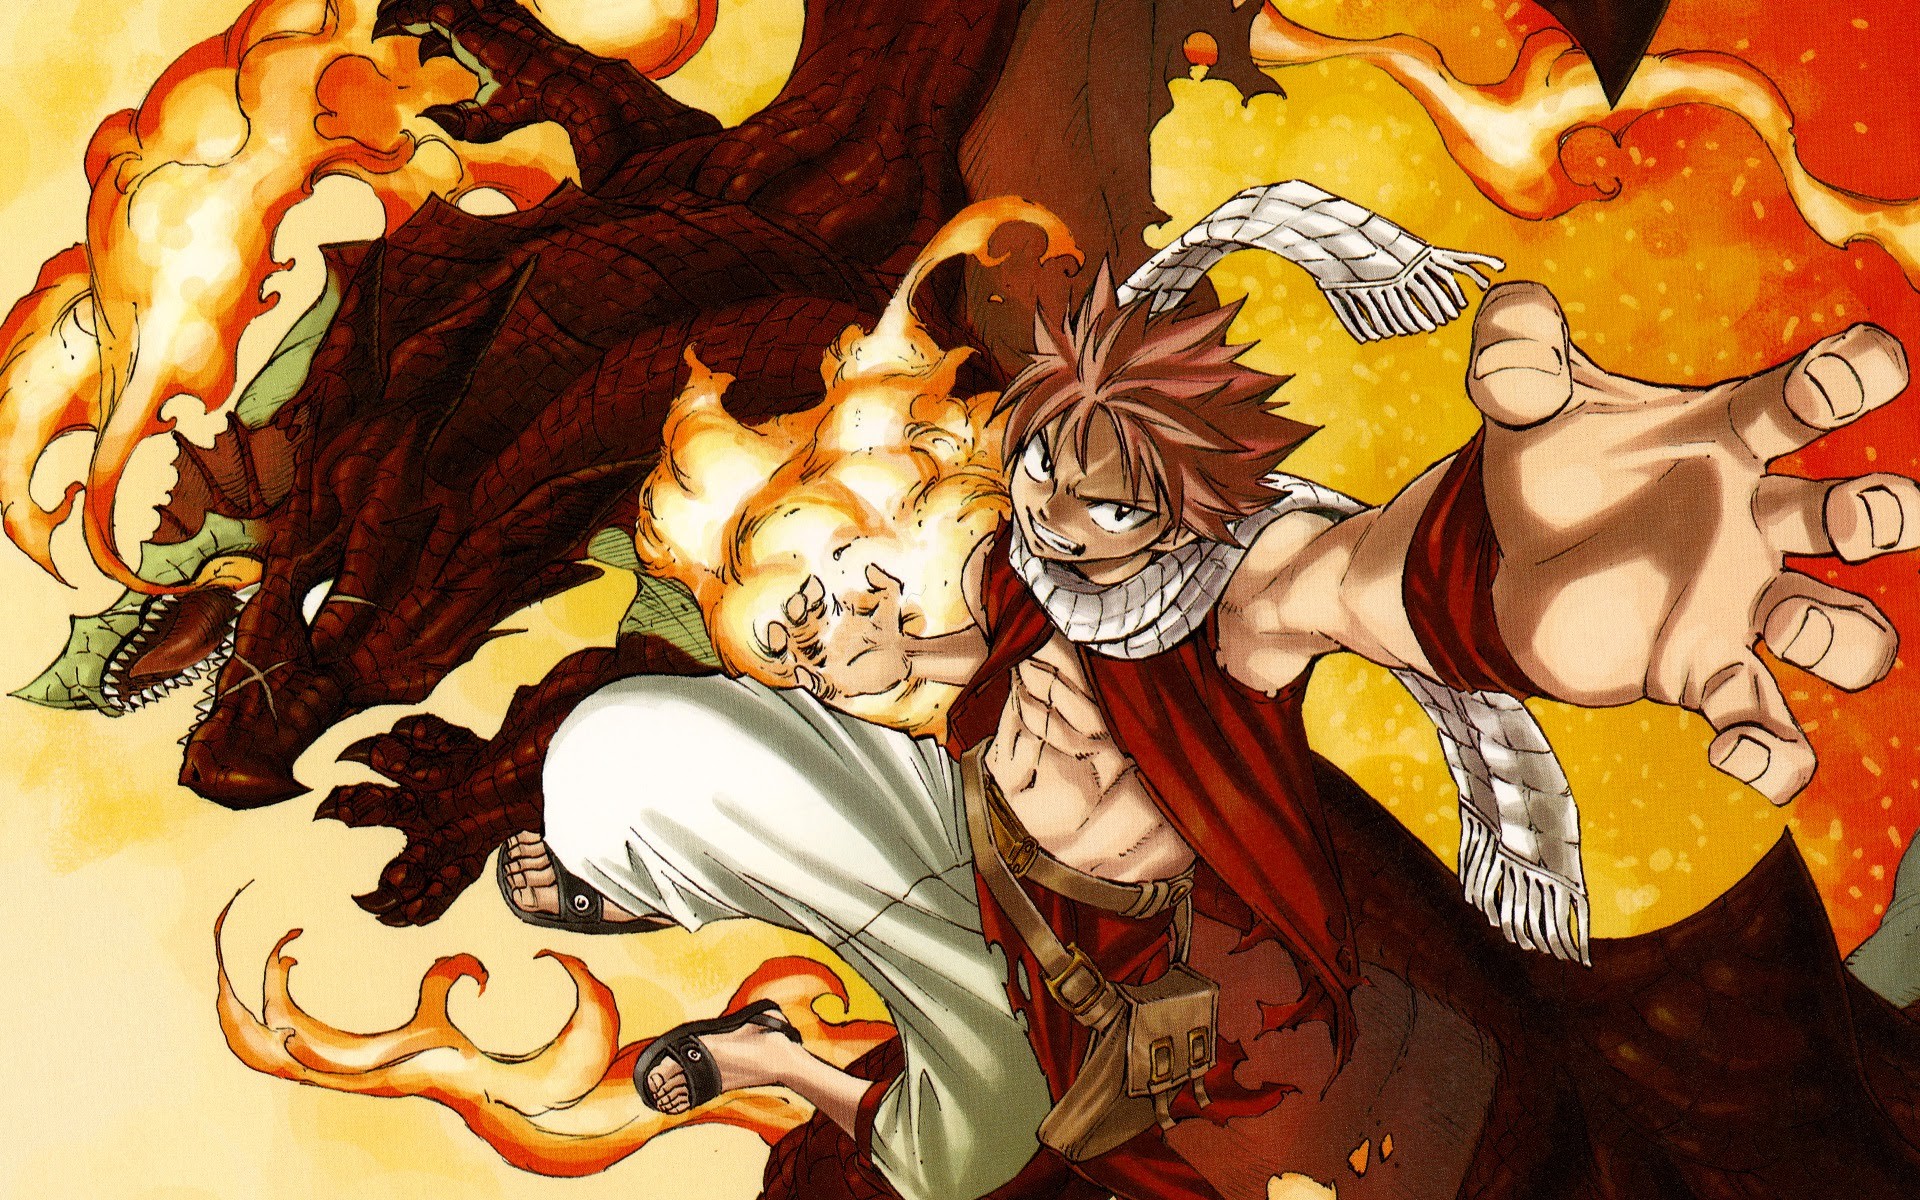 1920x1200 Fairy Tail 7 Dragon Slayer Images As Wallpaper HD